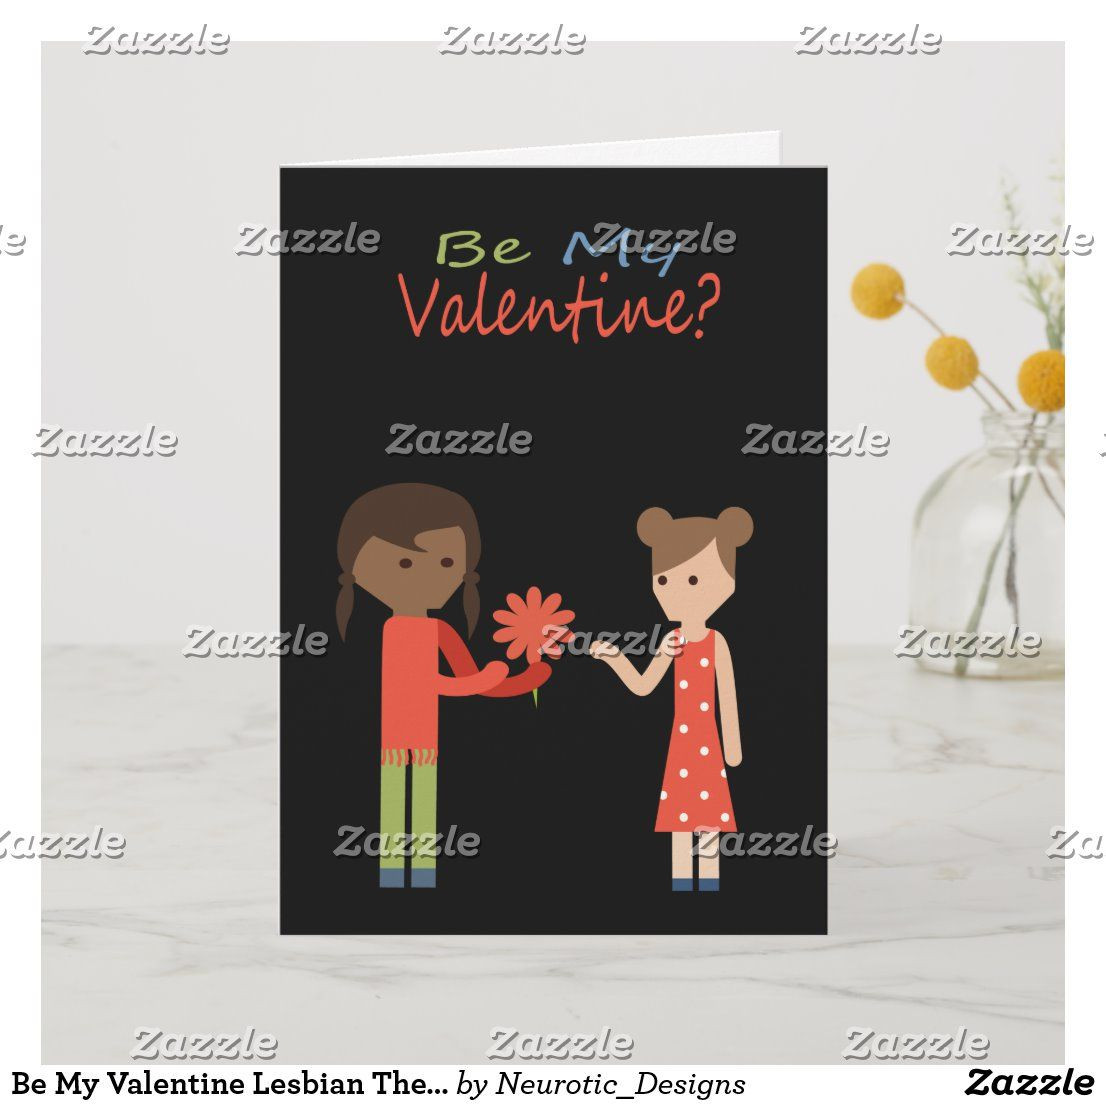 Lesbian Valentines Day Ideas
 Be My Valentine Lesbian Themed Holiday Card